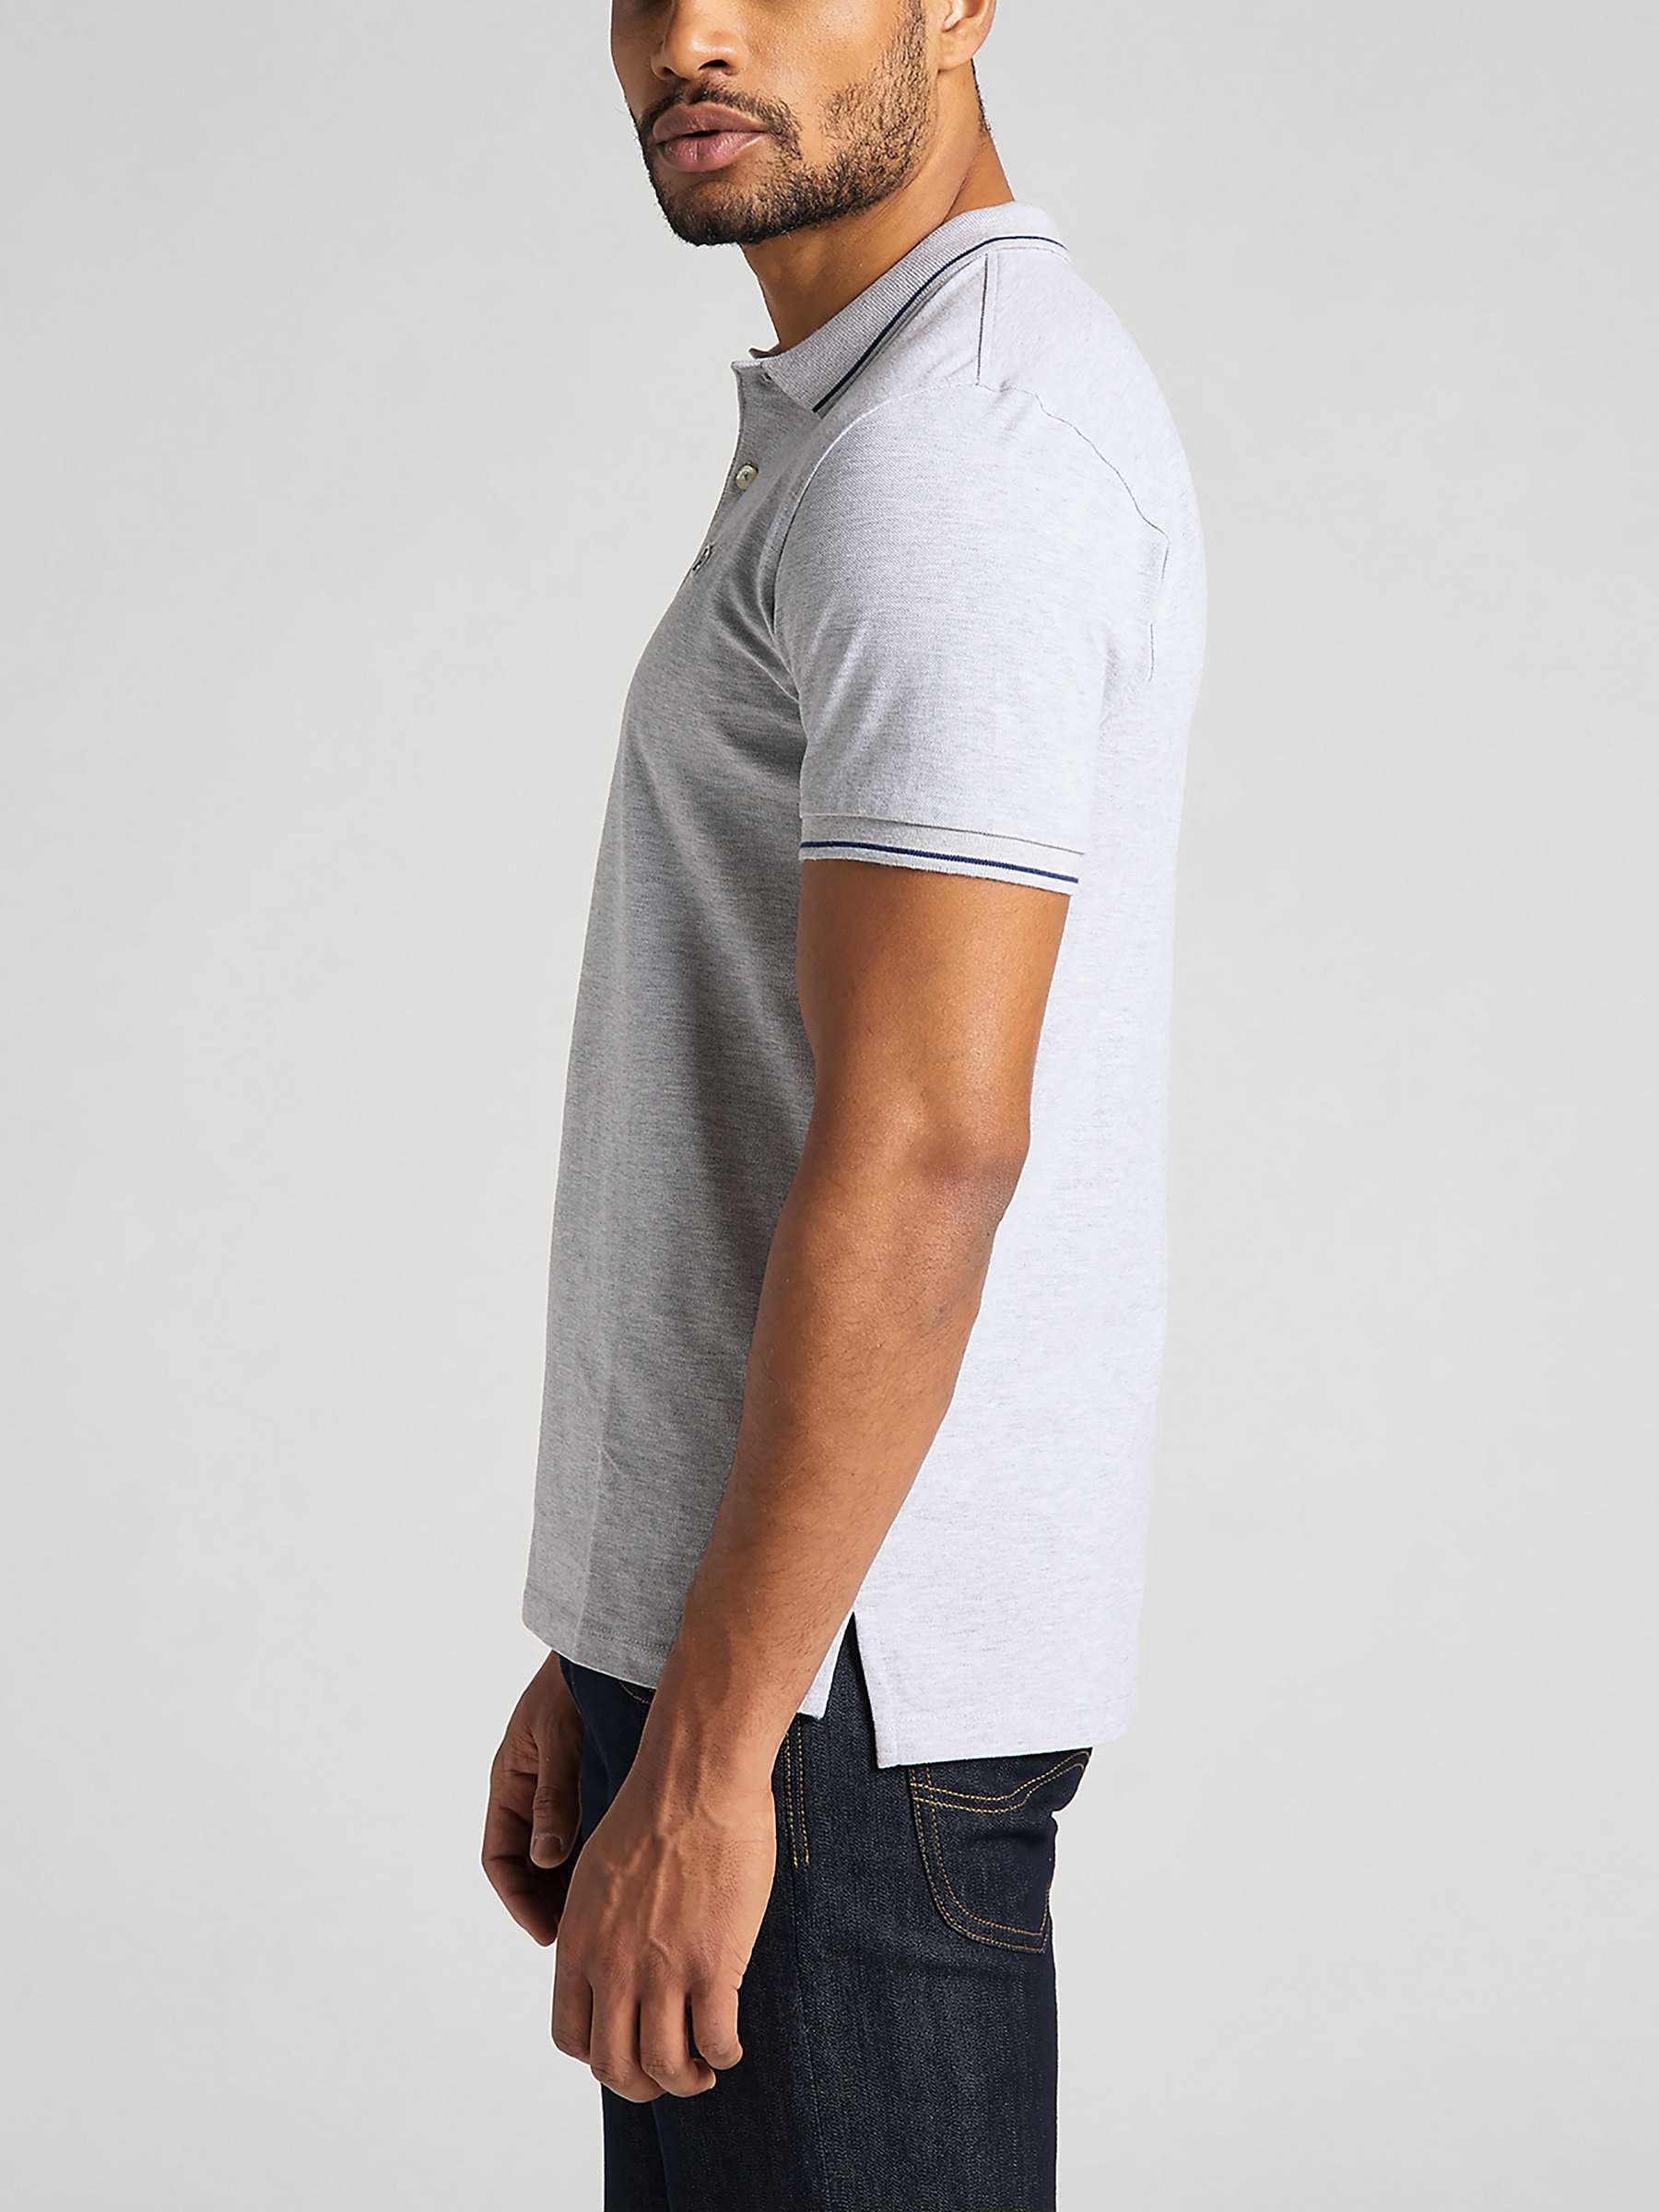 Buy Lee Short Sleeve Polo Top Online at johnlewis.com